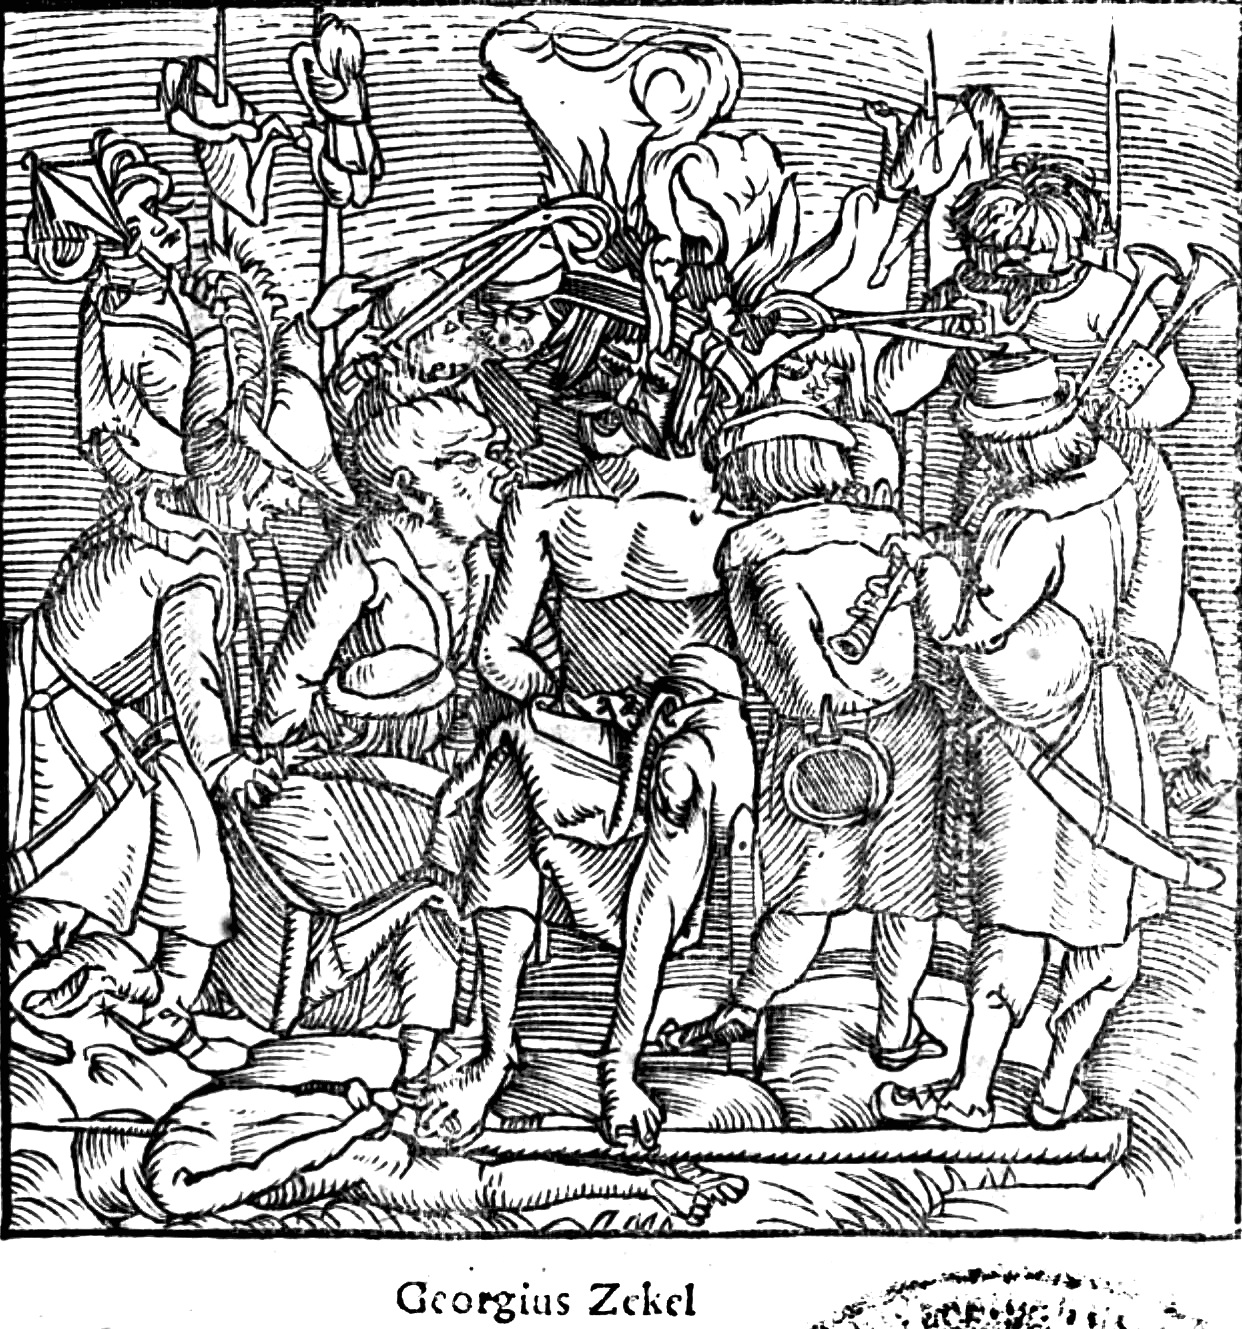  Contemporary woodcut depicting the horrific execution of György Dózsa, the leader of a Hungarian peasant revolt. 